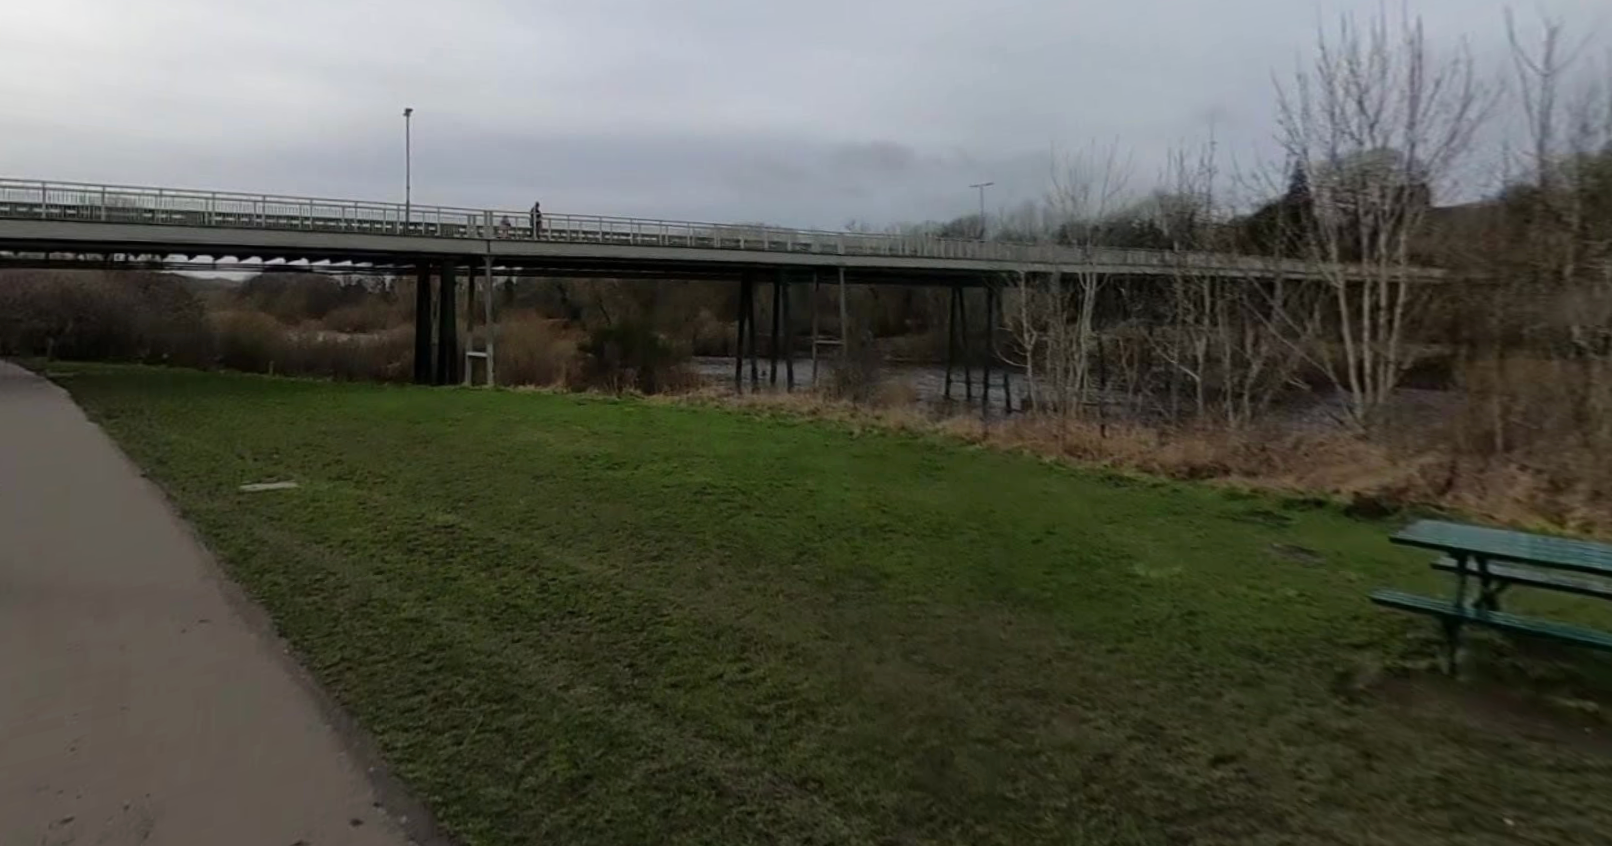 The two teenagers went into the water near Ovingham Bridge, Northumberland